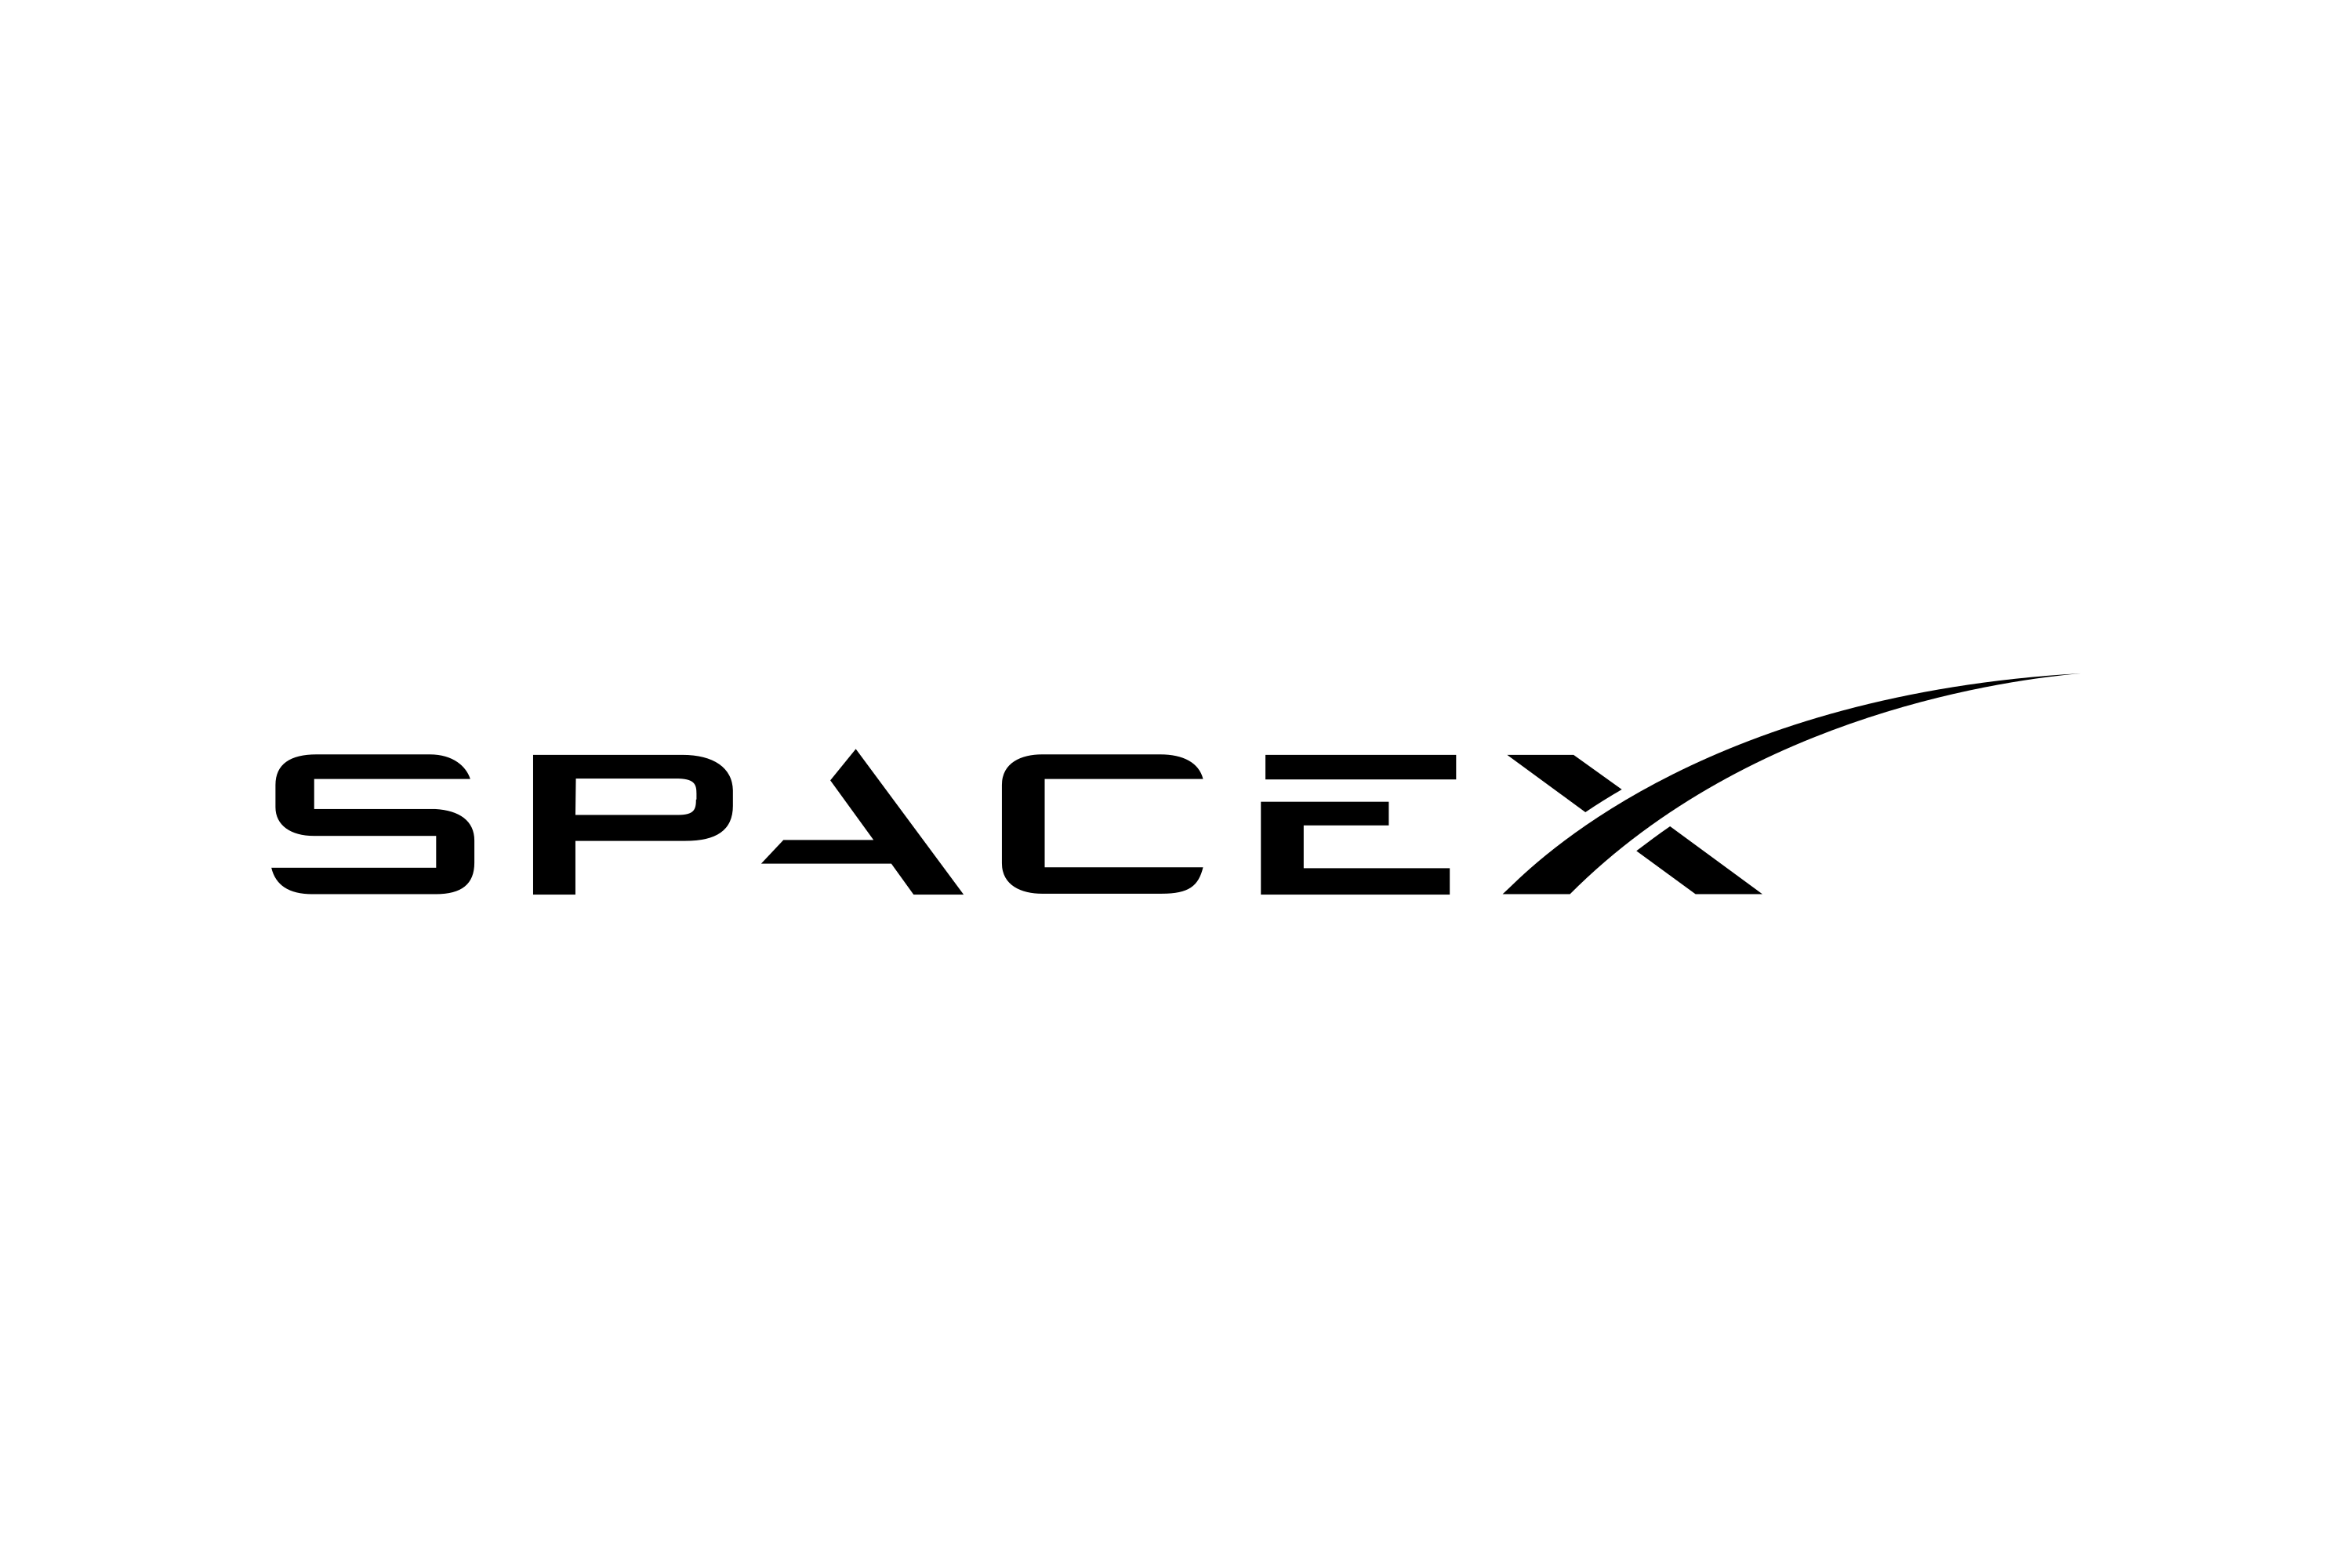 Download Spacex Space Exploration Technologies Corp Logo In Svg Vector Or Png File Format Logo Wine